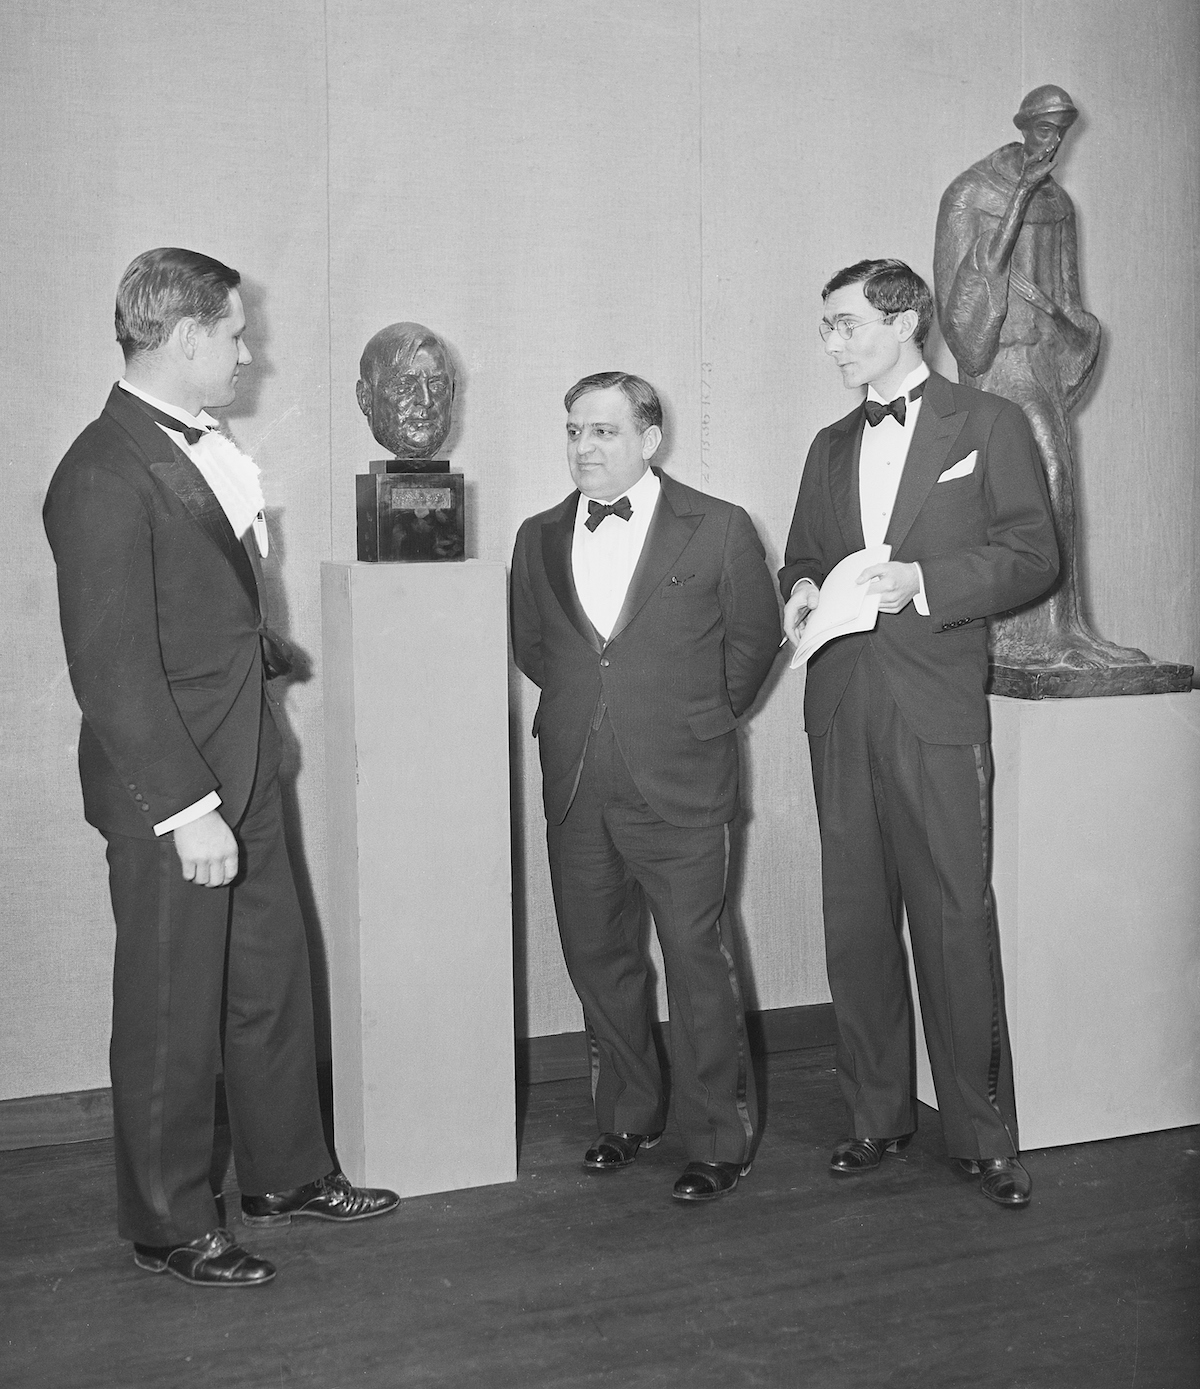 A black and white picture of three men in tuxedoes standing next to two sculptures.